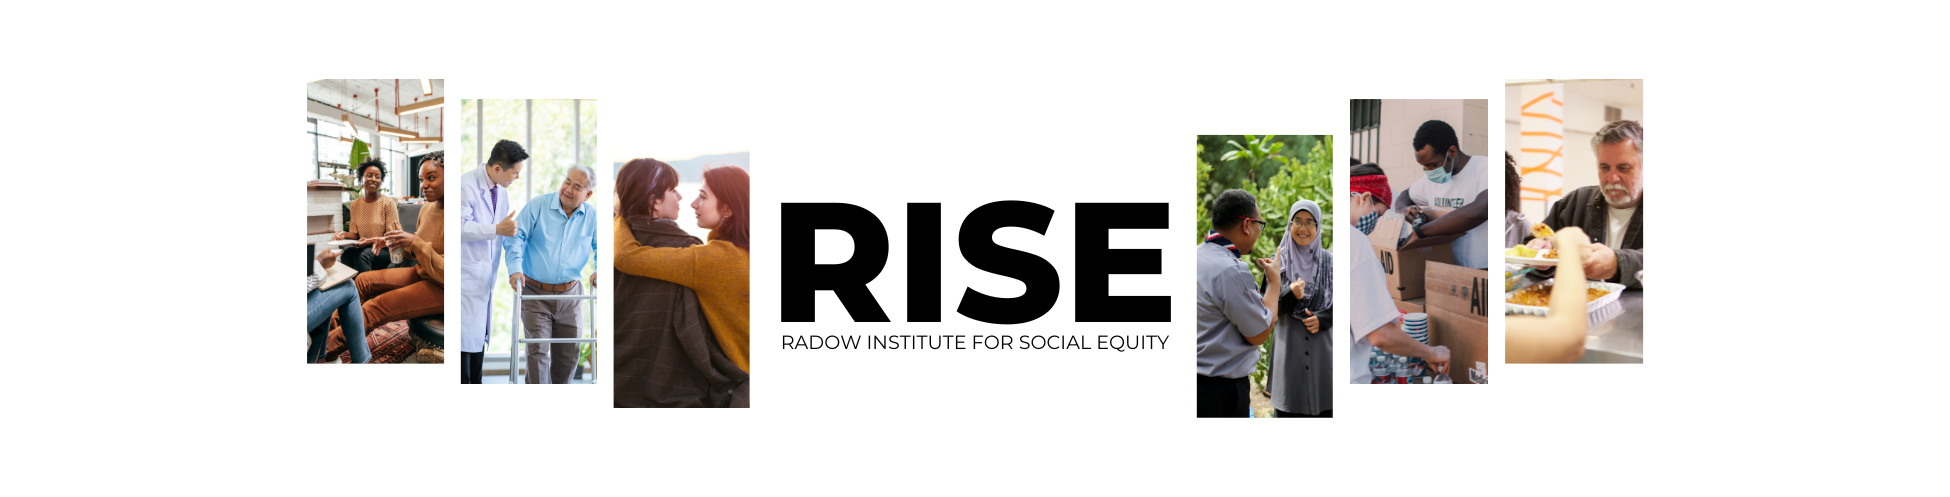 Radow Institute of Social Equity